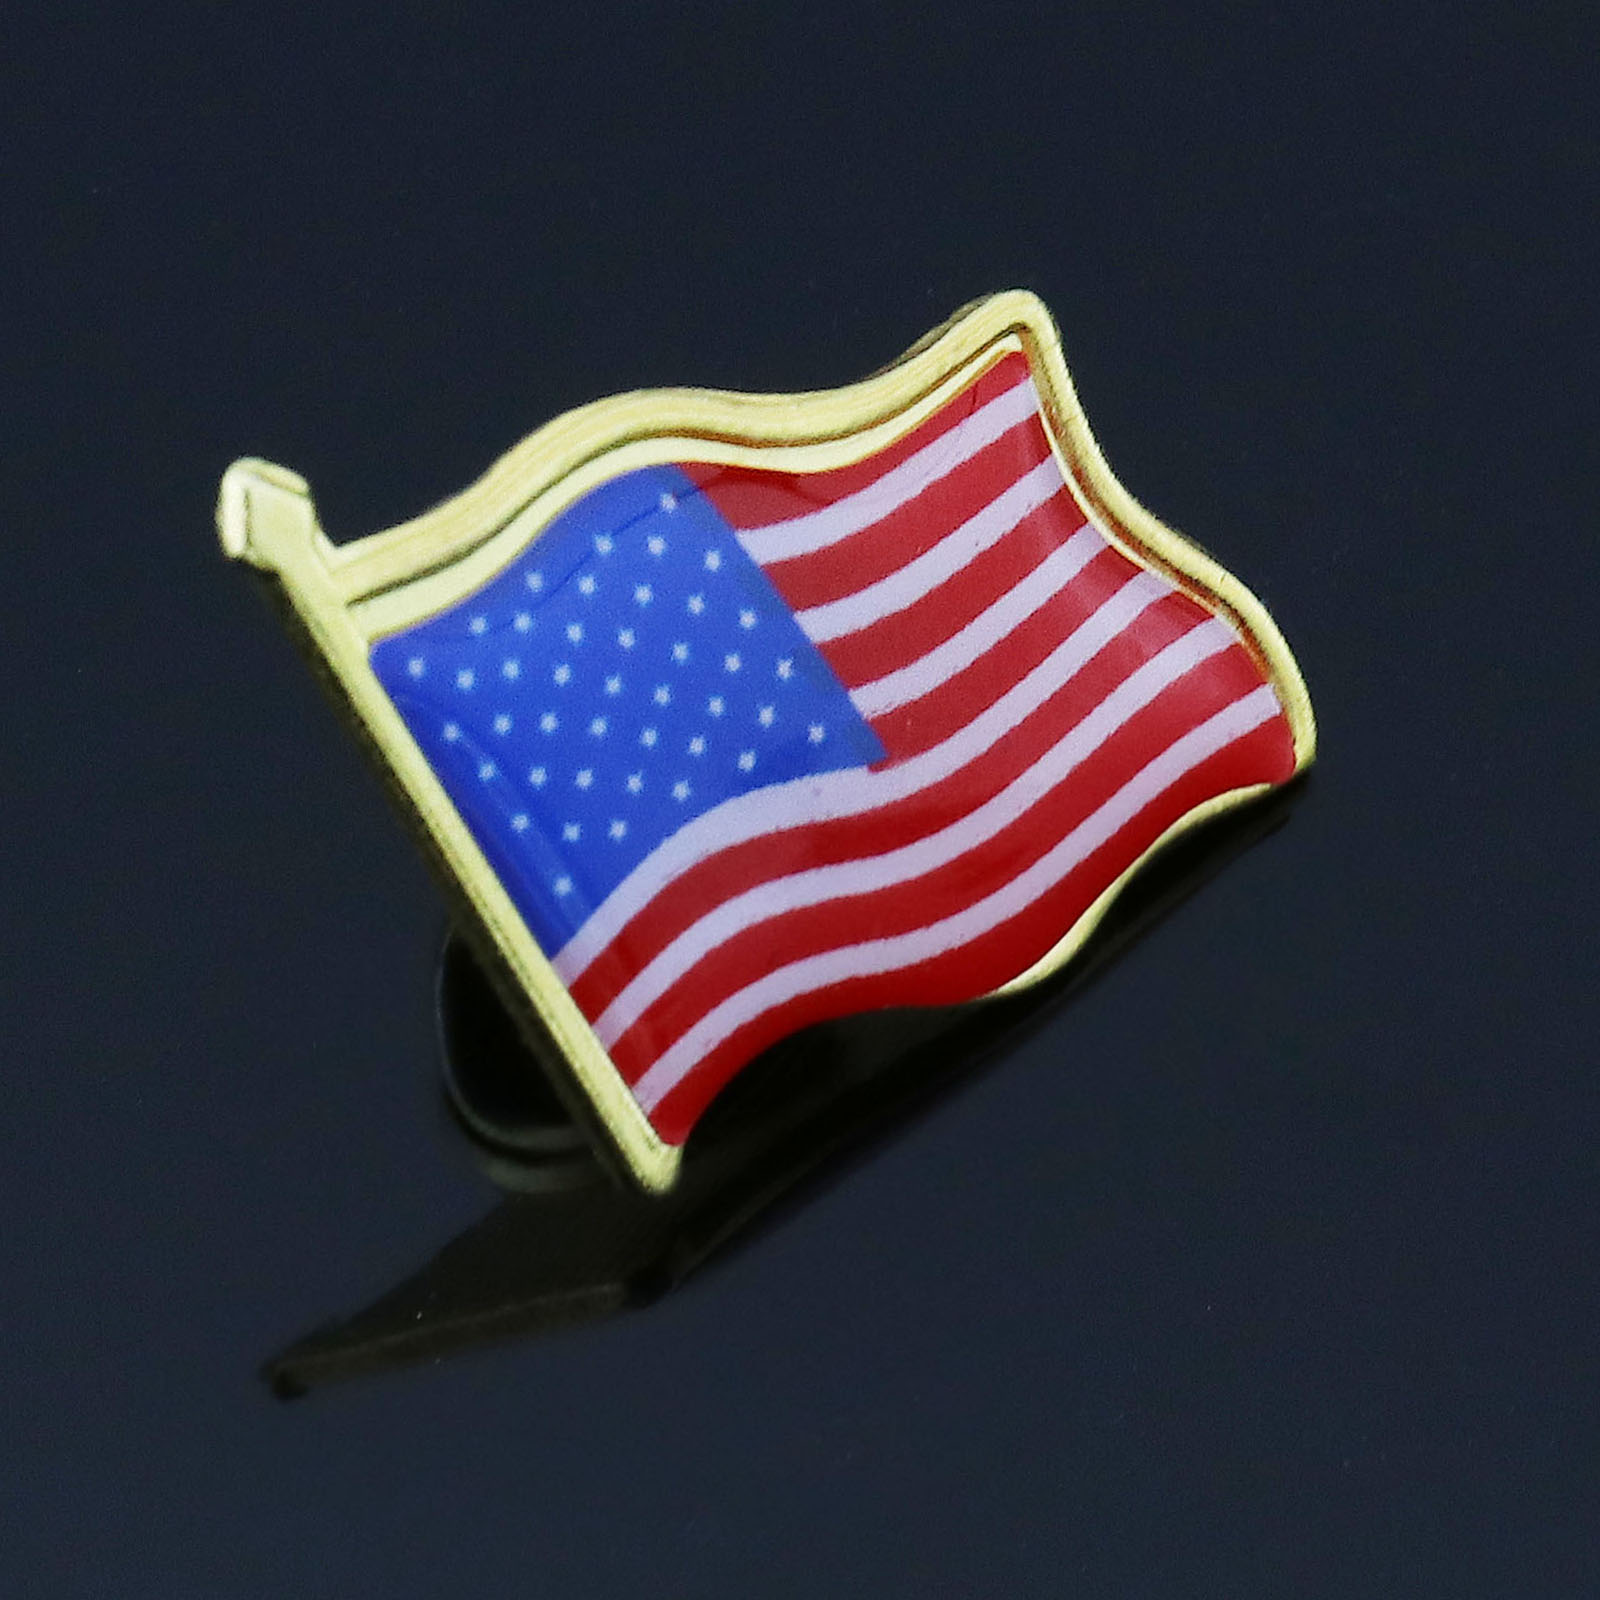 50 Pack American Flag Lapel Pins United States Usa Hat Tie Tack Badge Pin New 786862881383 Ebay